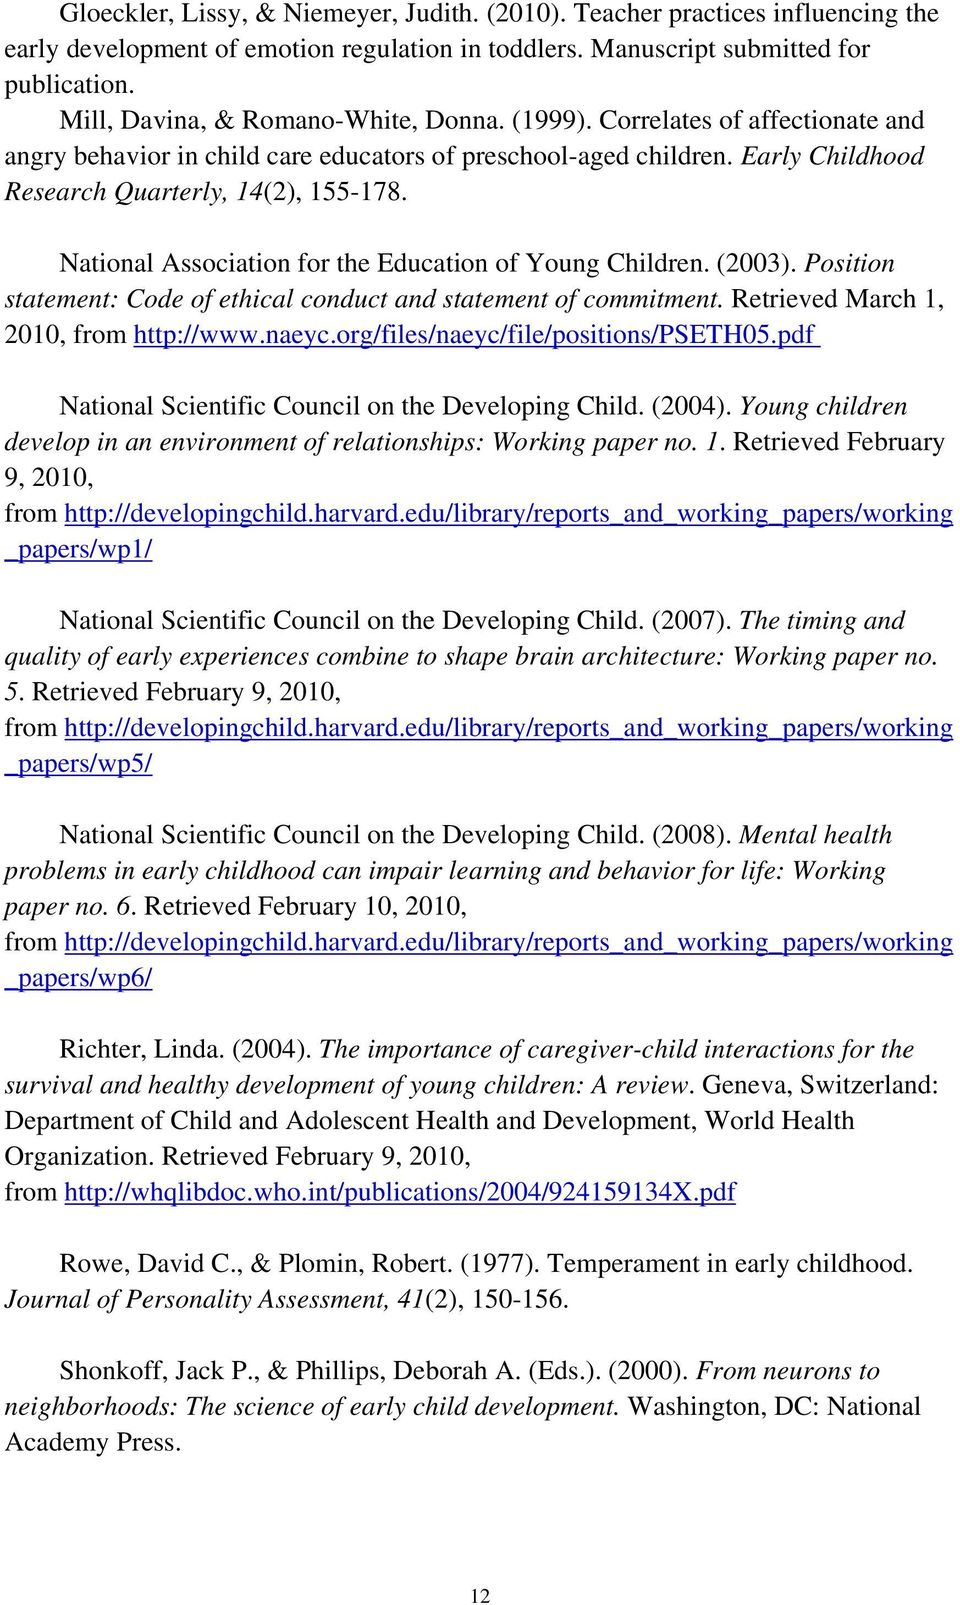 National Association for the Education of Young Children. (2003). Position statement: Code of ethical conduct and statement of commitment. Retrieved March 1, 2010, from http://www.naeyc.